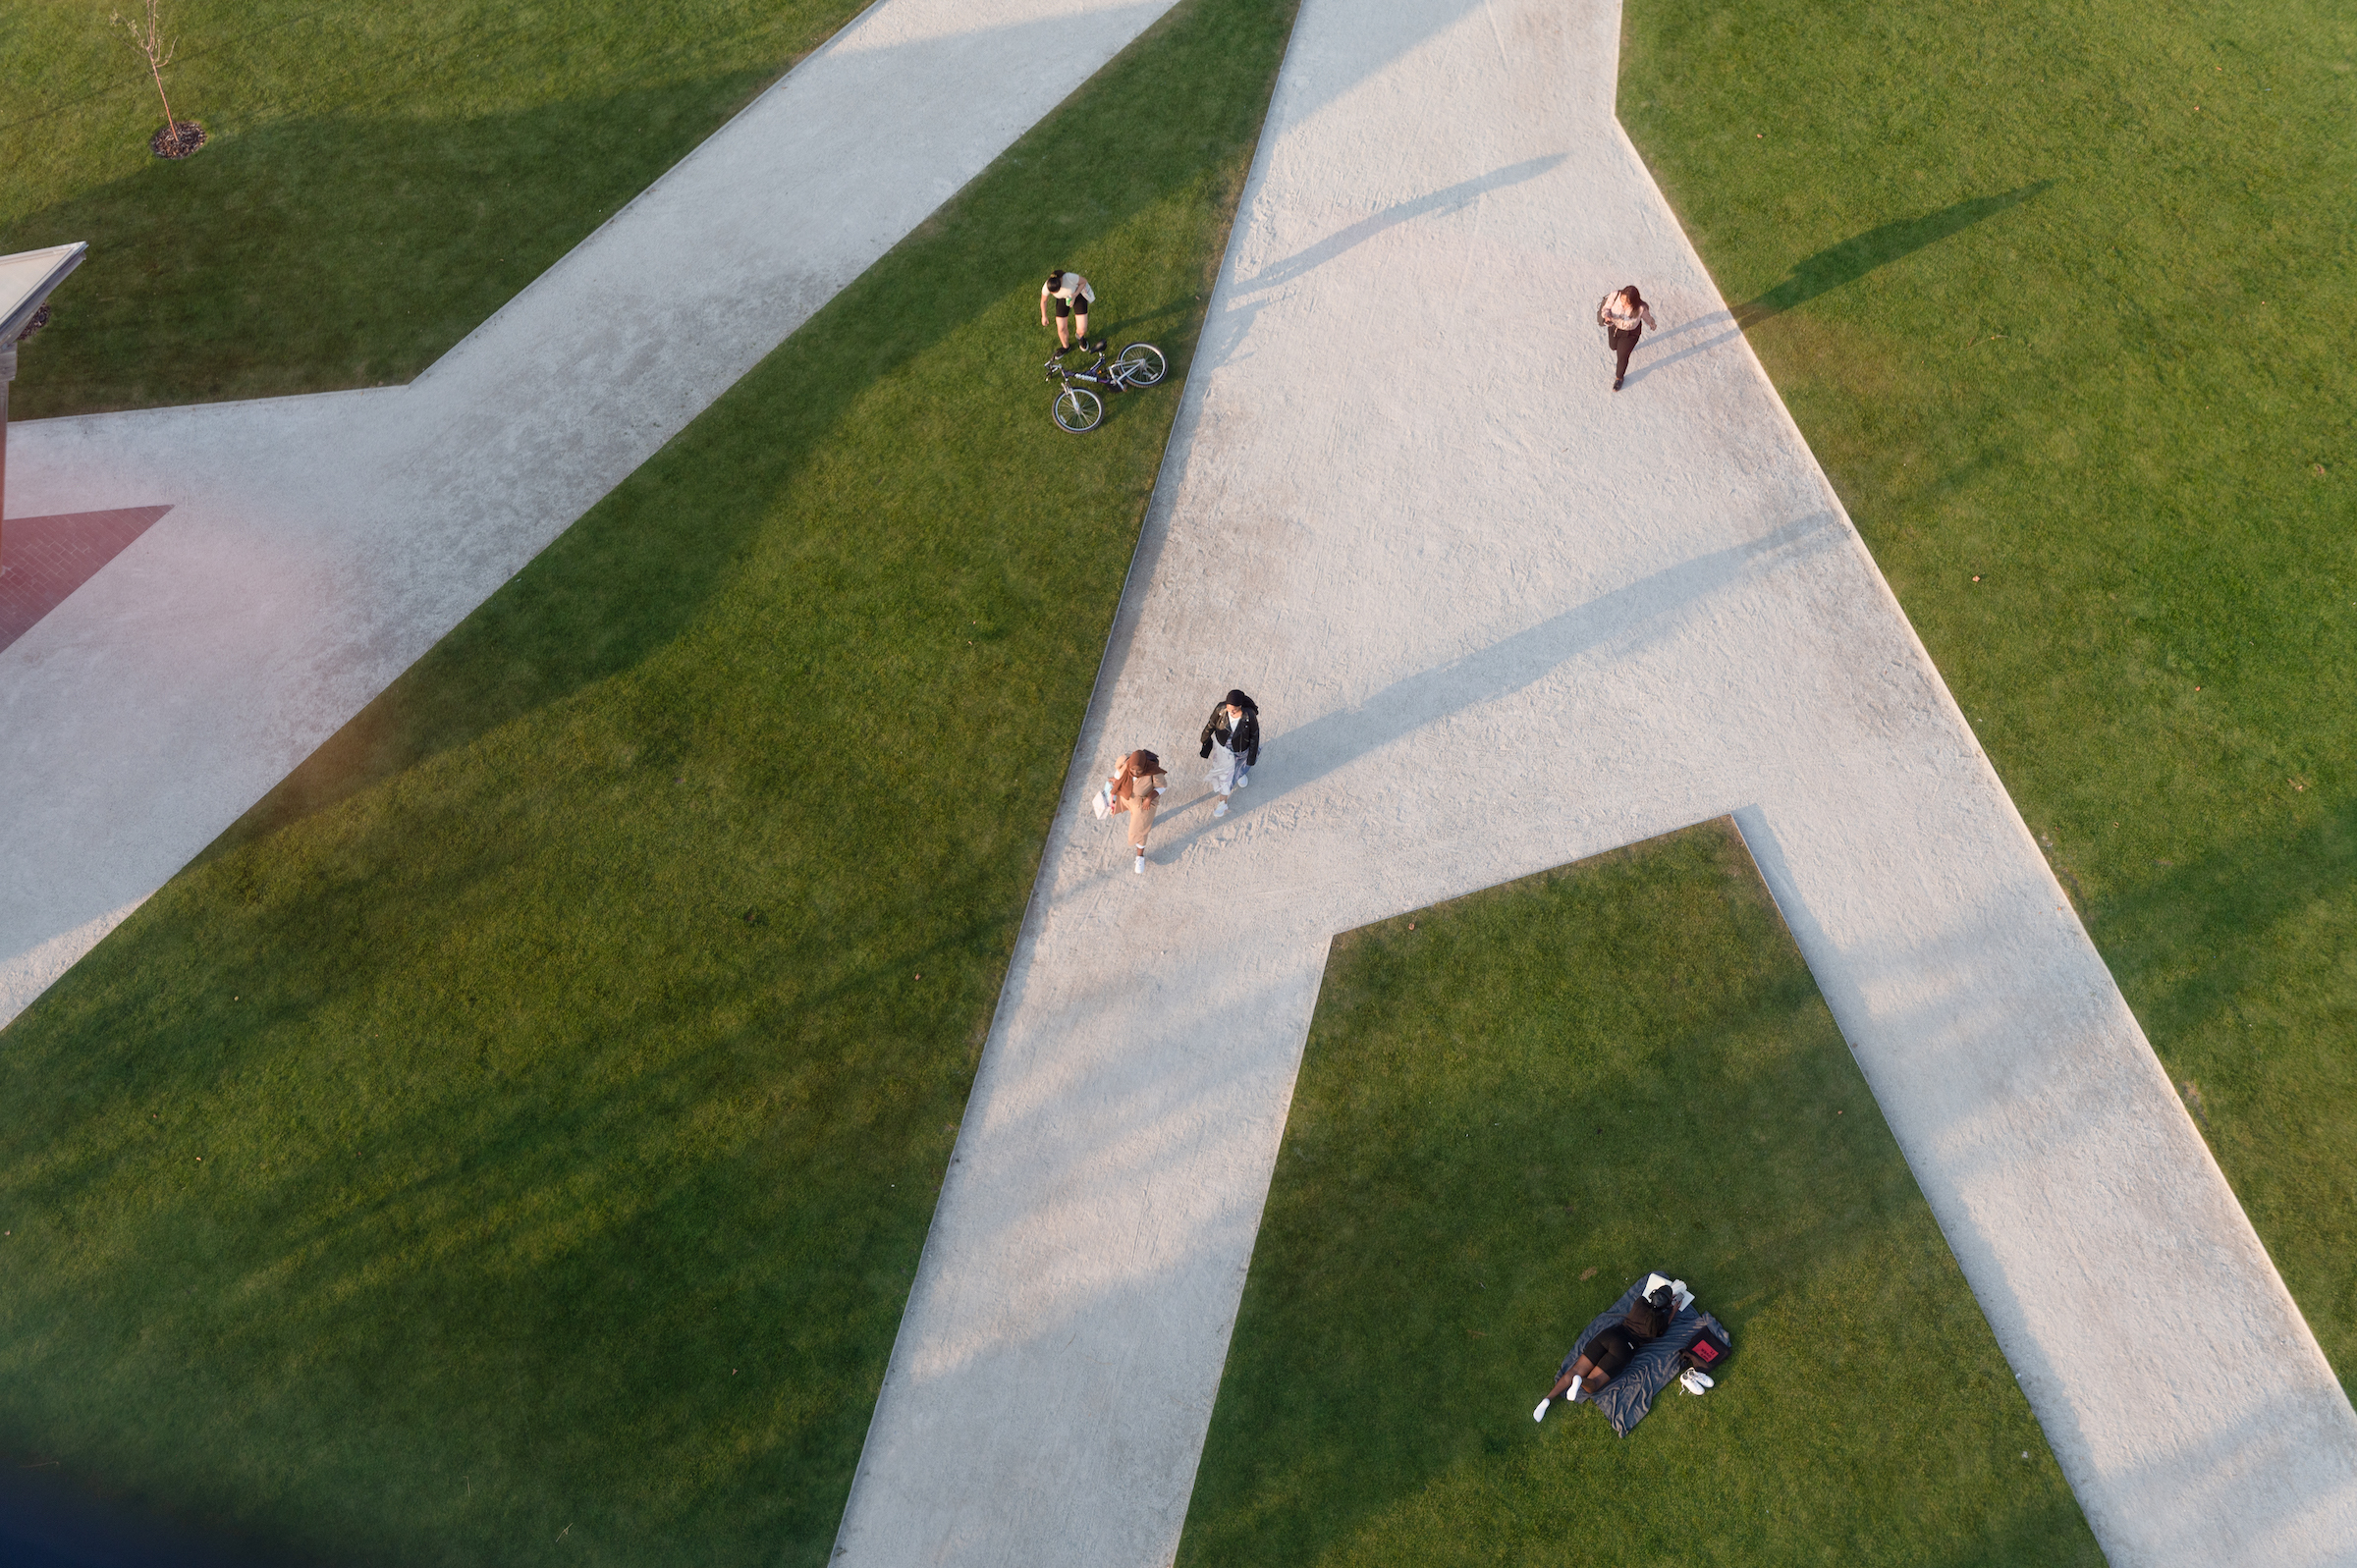 Grassy area with people, seen from above